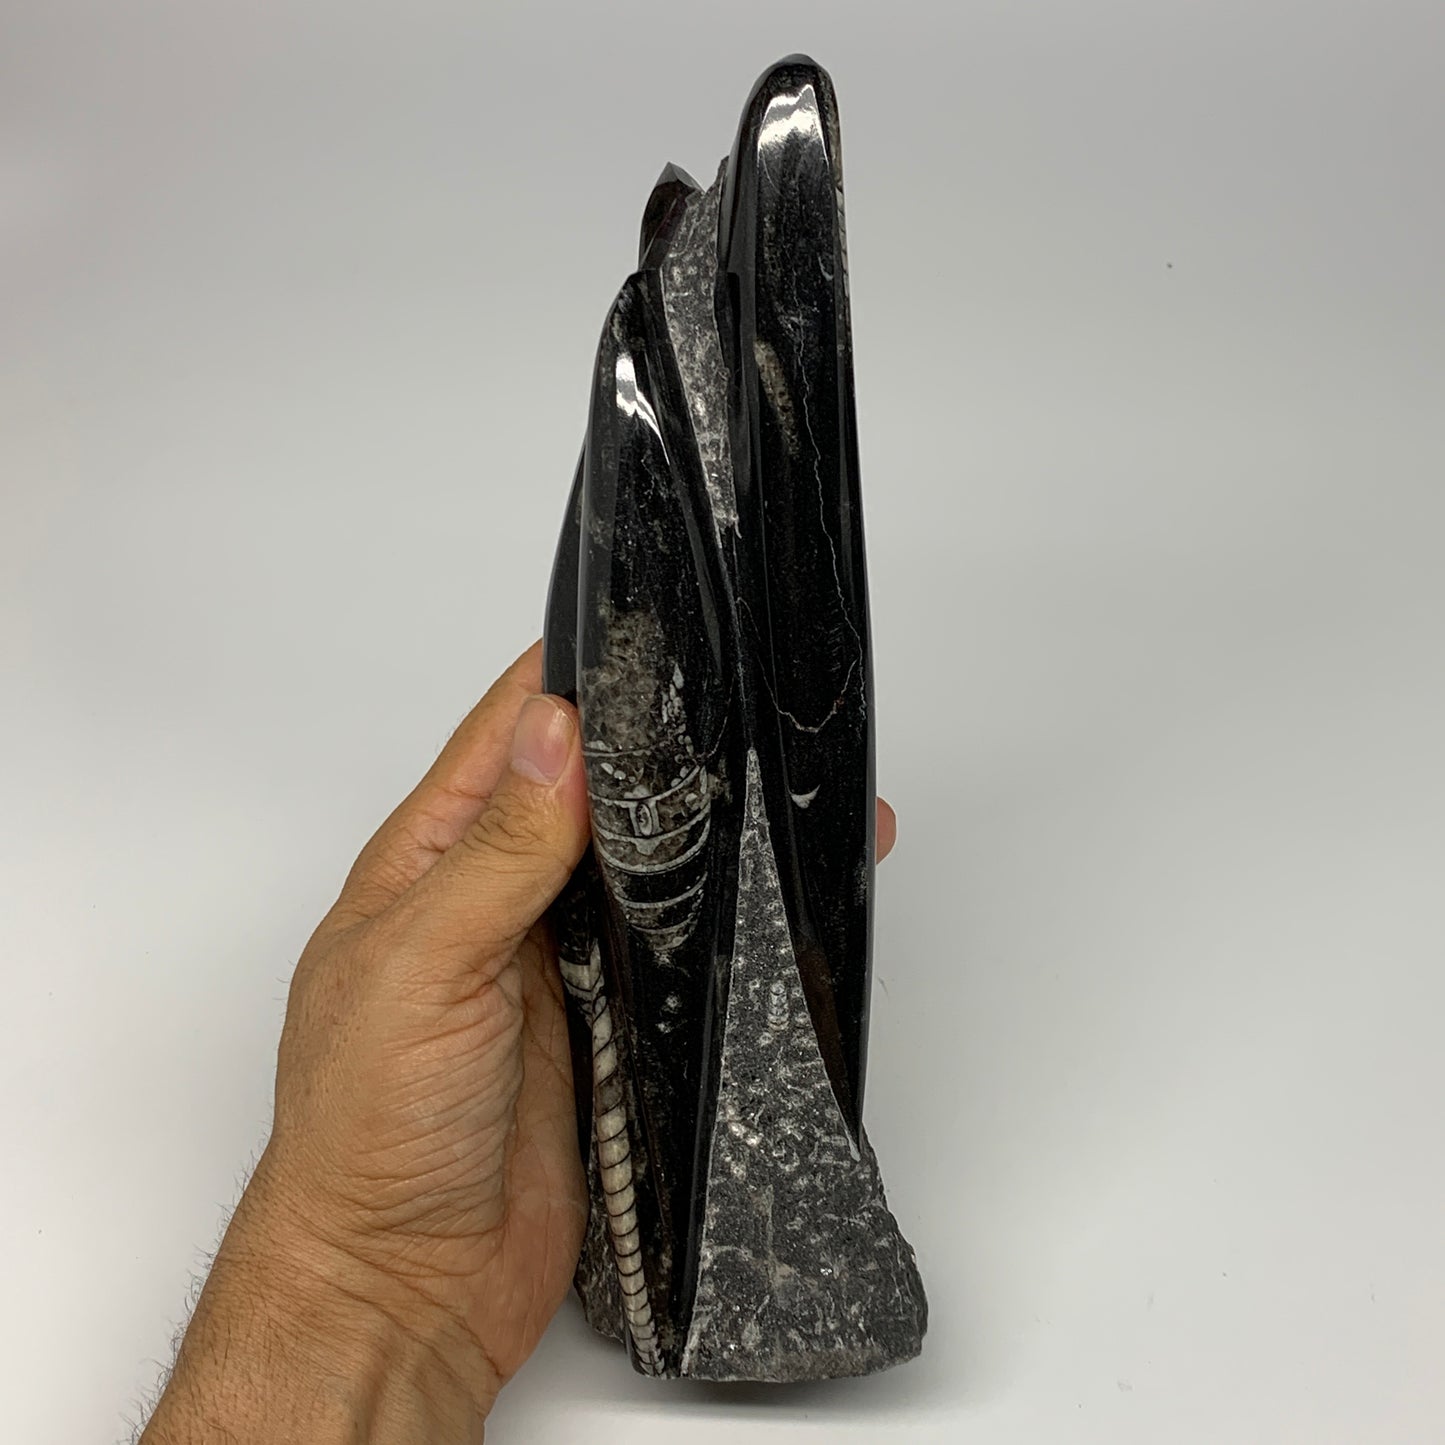 1130g, 9.1"x2.3"x2" Black Fossils Orthoceras Sculpture Tower @Morocco, B23413